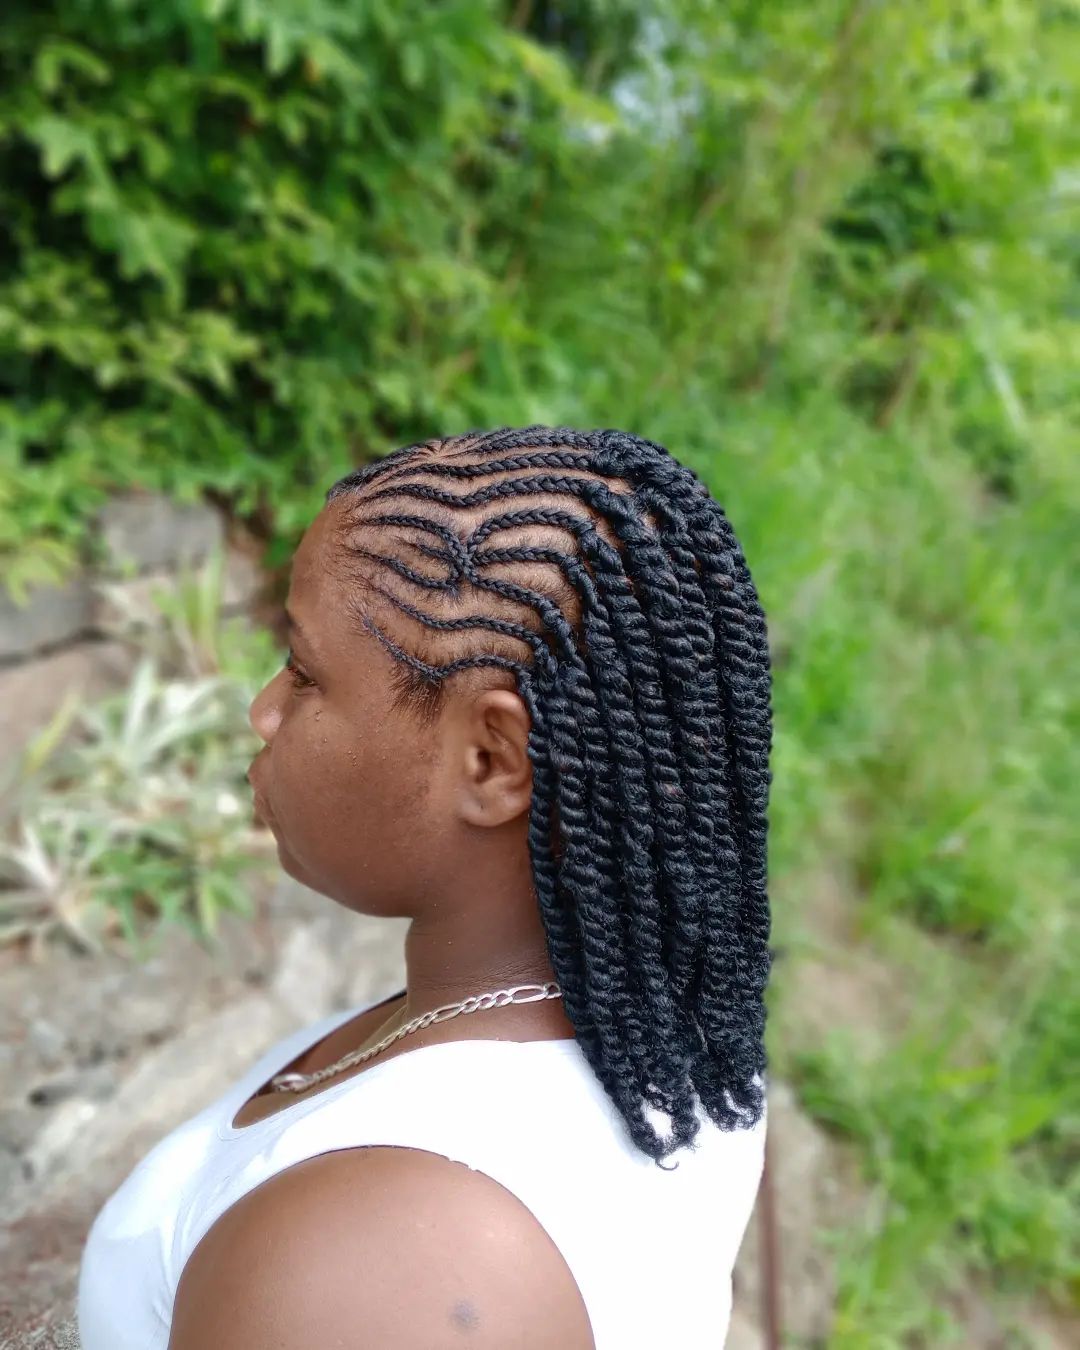 9. Half-Front Cornrow With Individual Short Twists